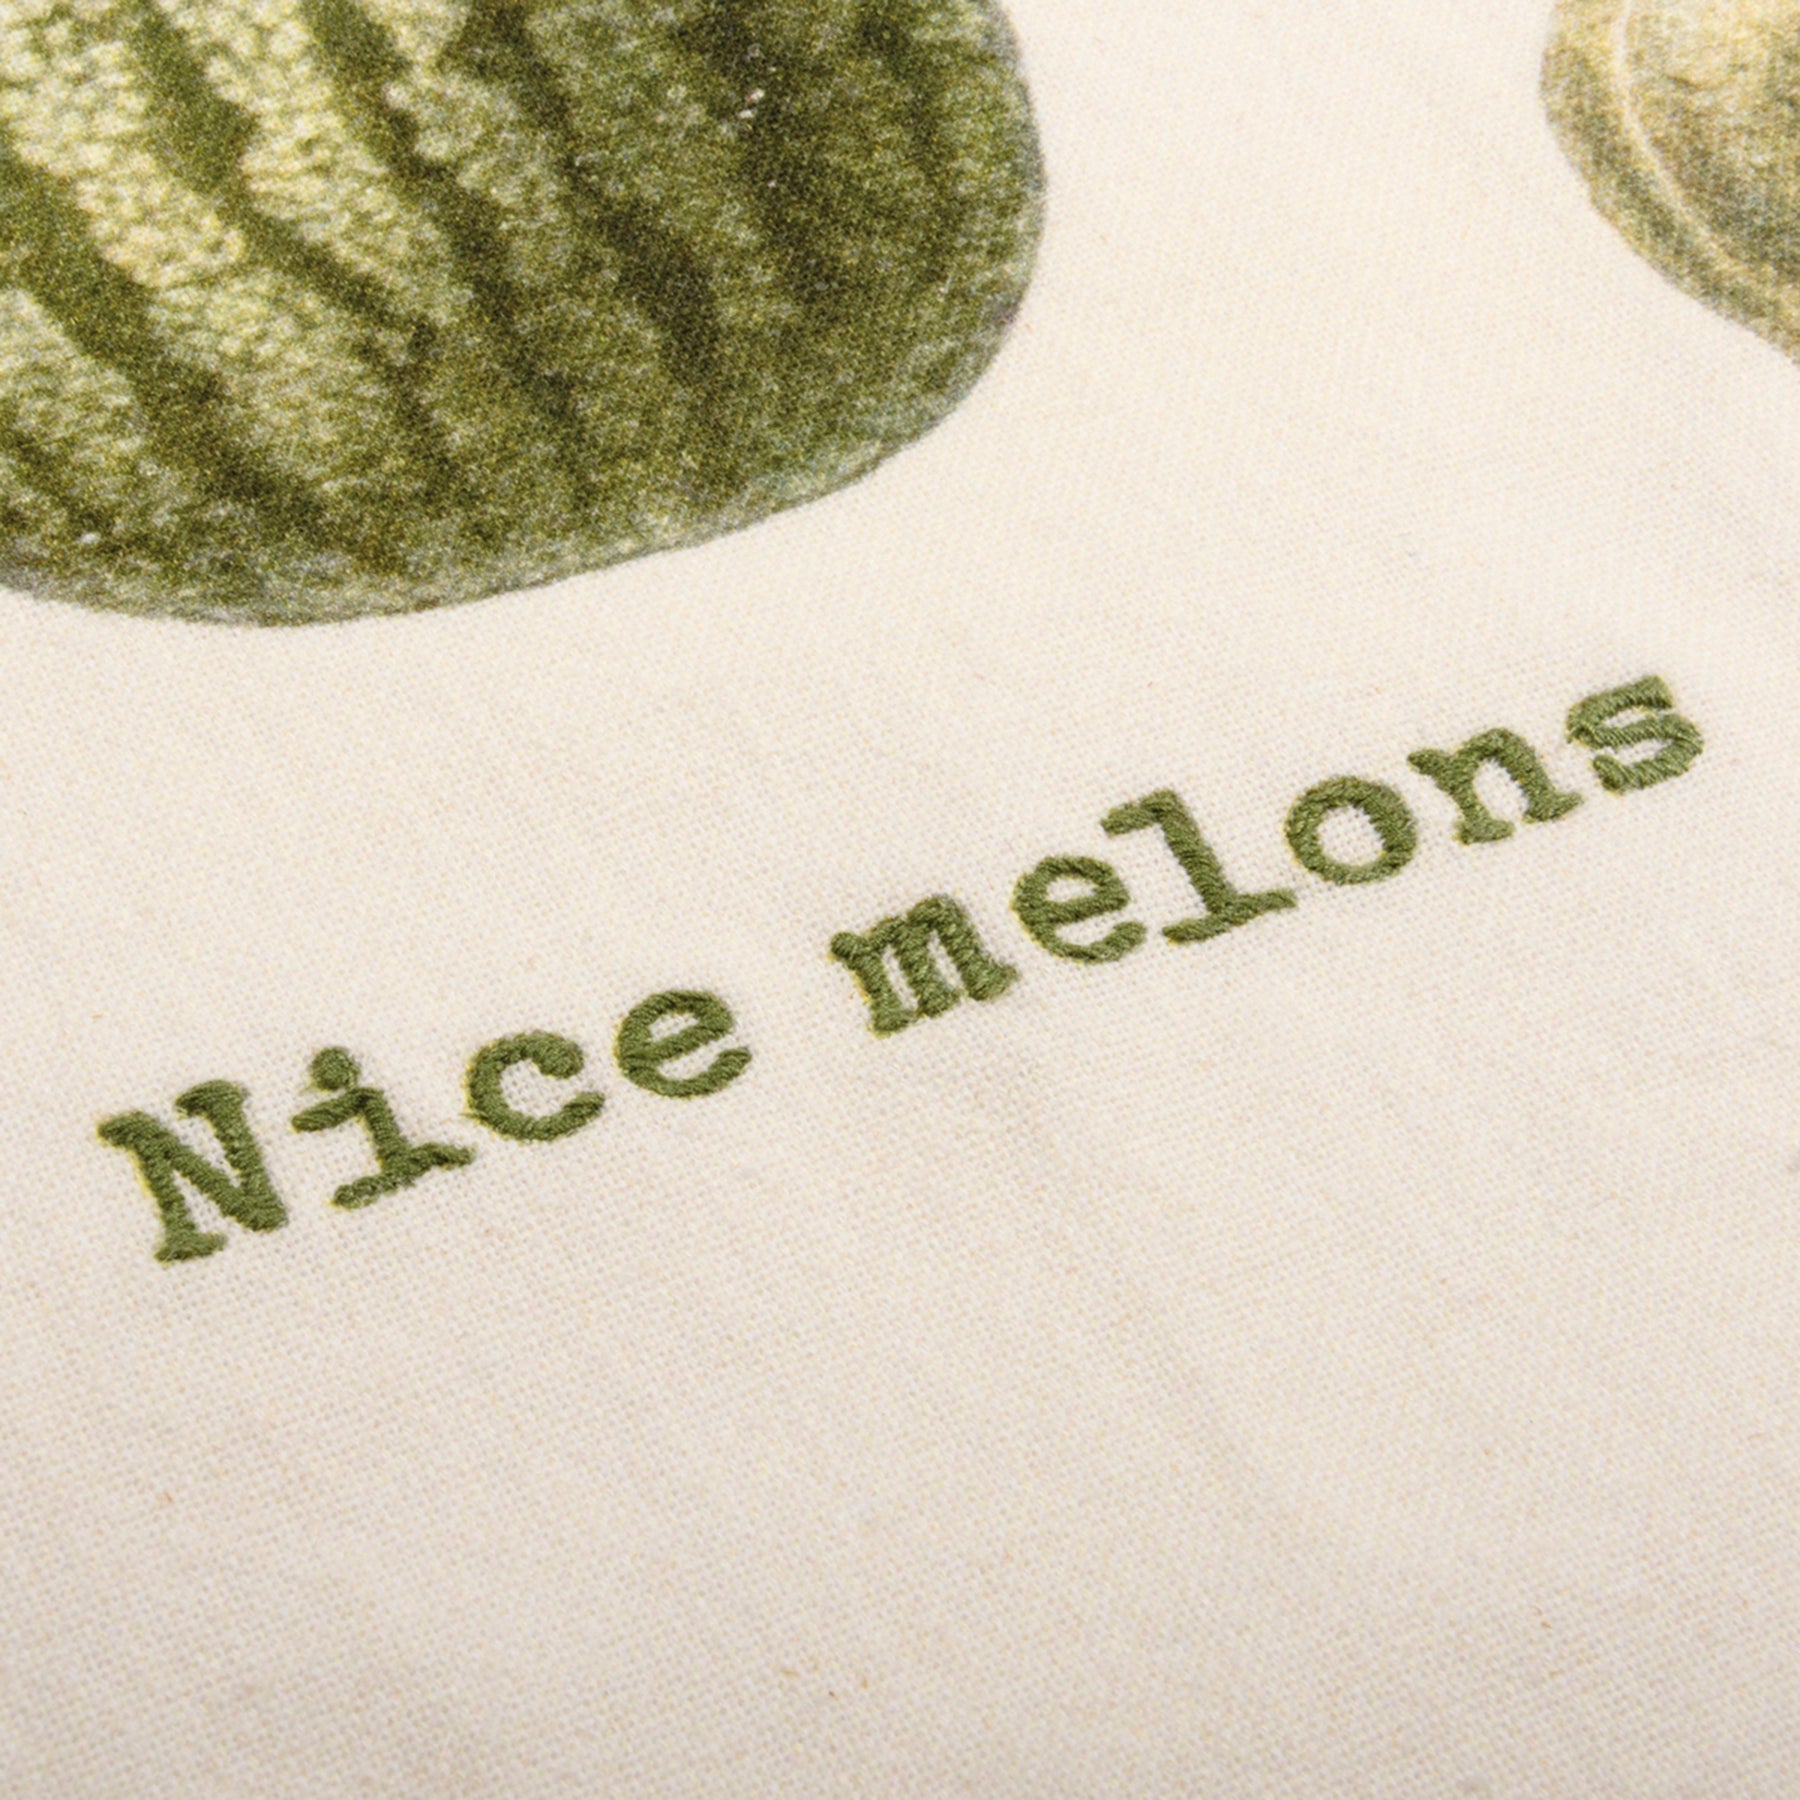 Nice Melons Dish Cloth Towel | Cotten Linen Novelty Tea Towel | Embroidered Text | 18" x 28"